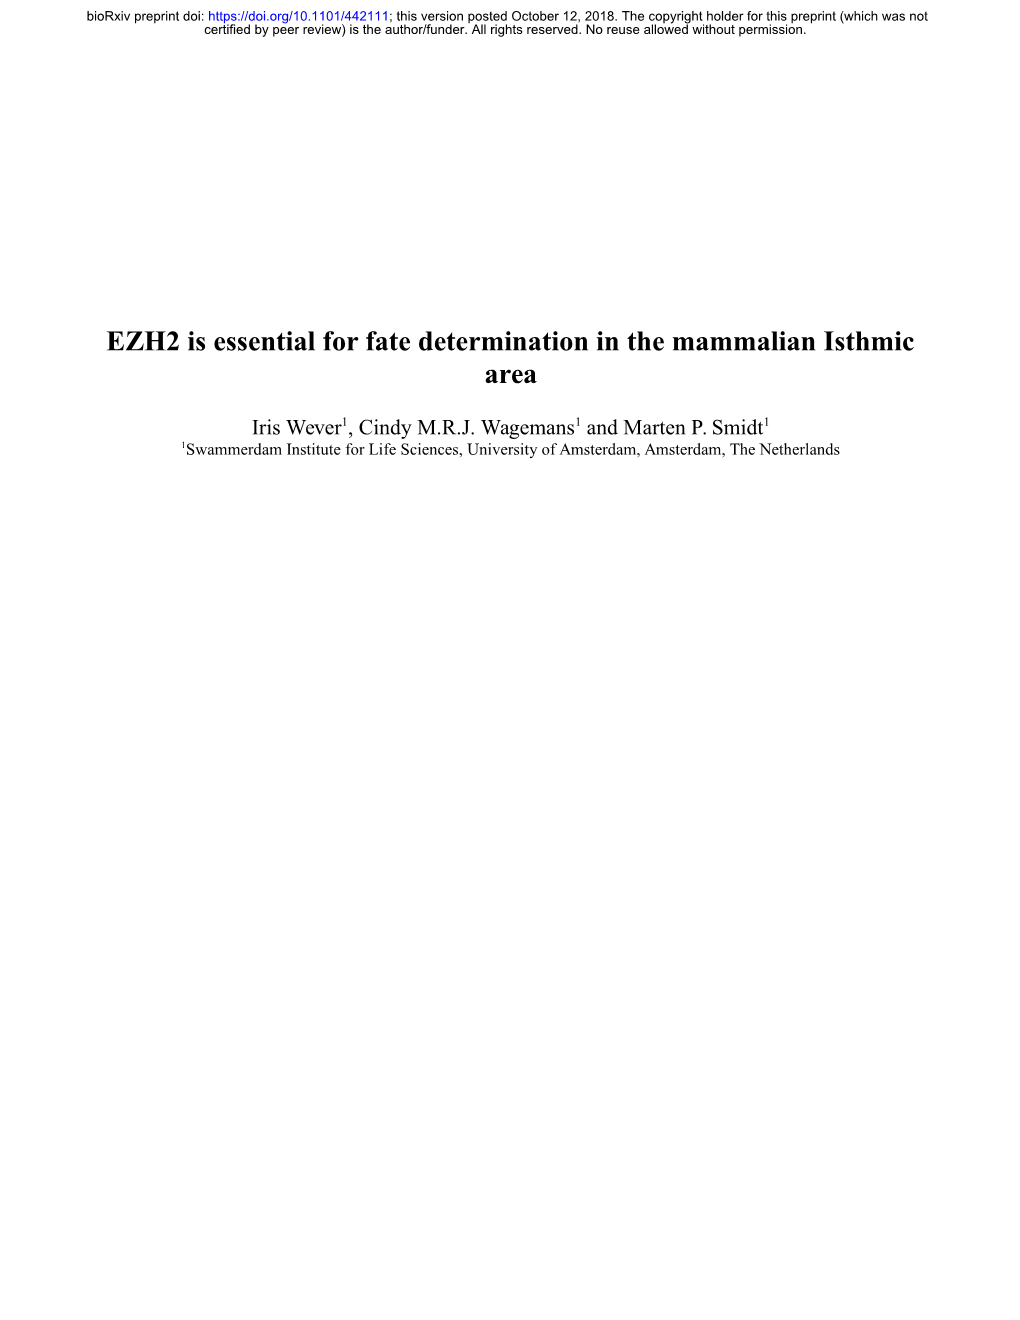 EZH2 Is Essential for Fate Determination in the Mammalian Isthmic Area